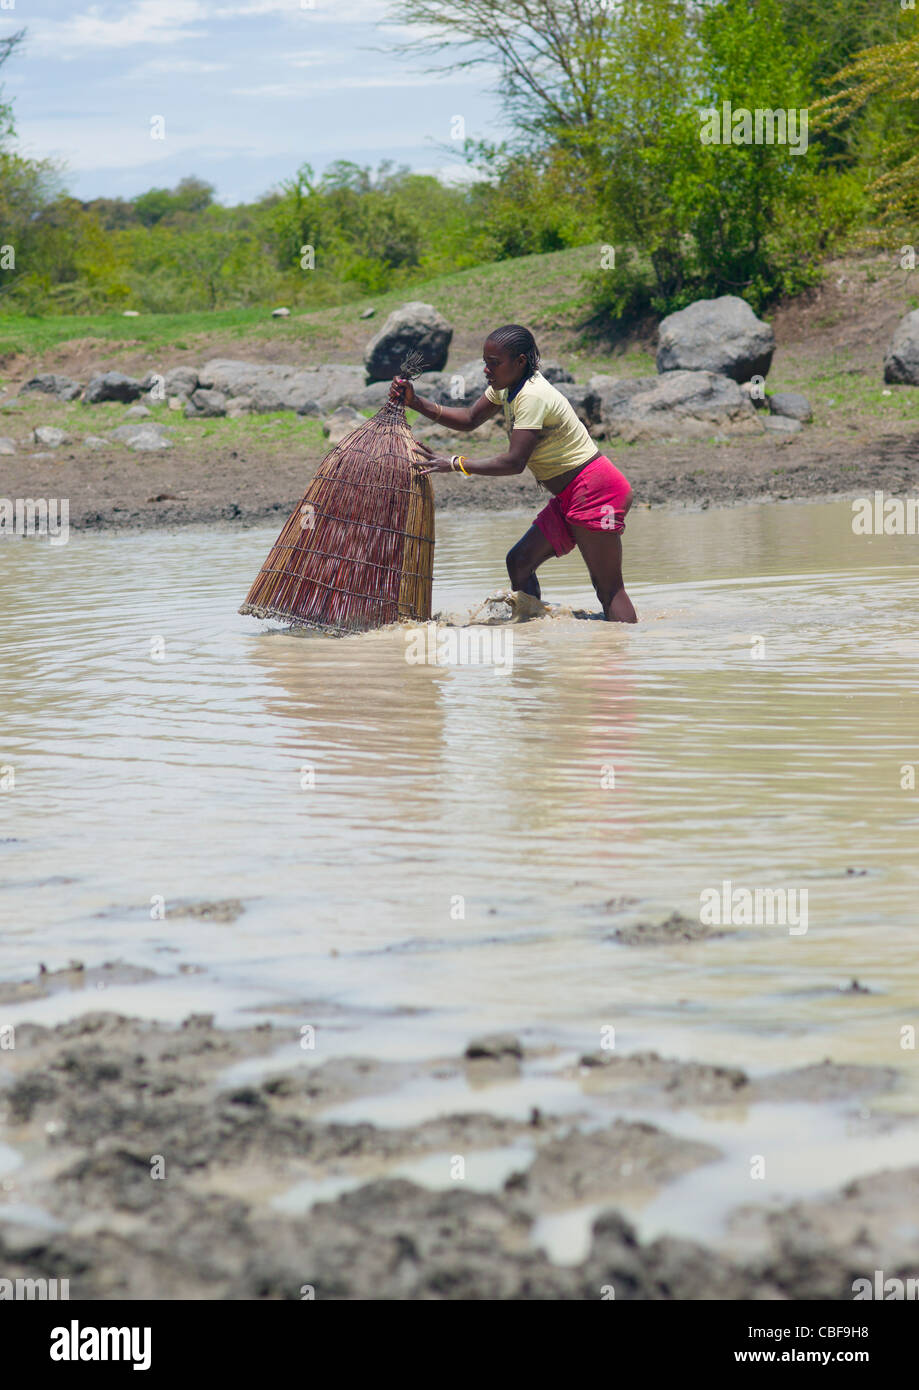 Girl Fishing In The River With A Basket Net, Angola Stock Photo - Alamy